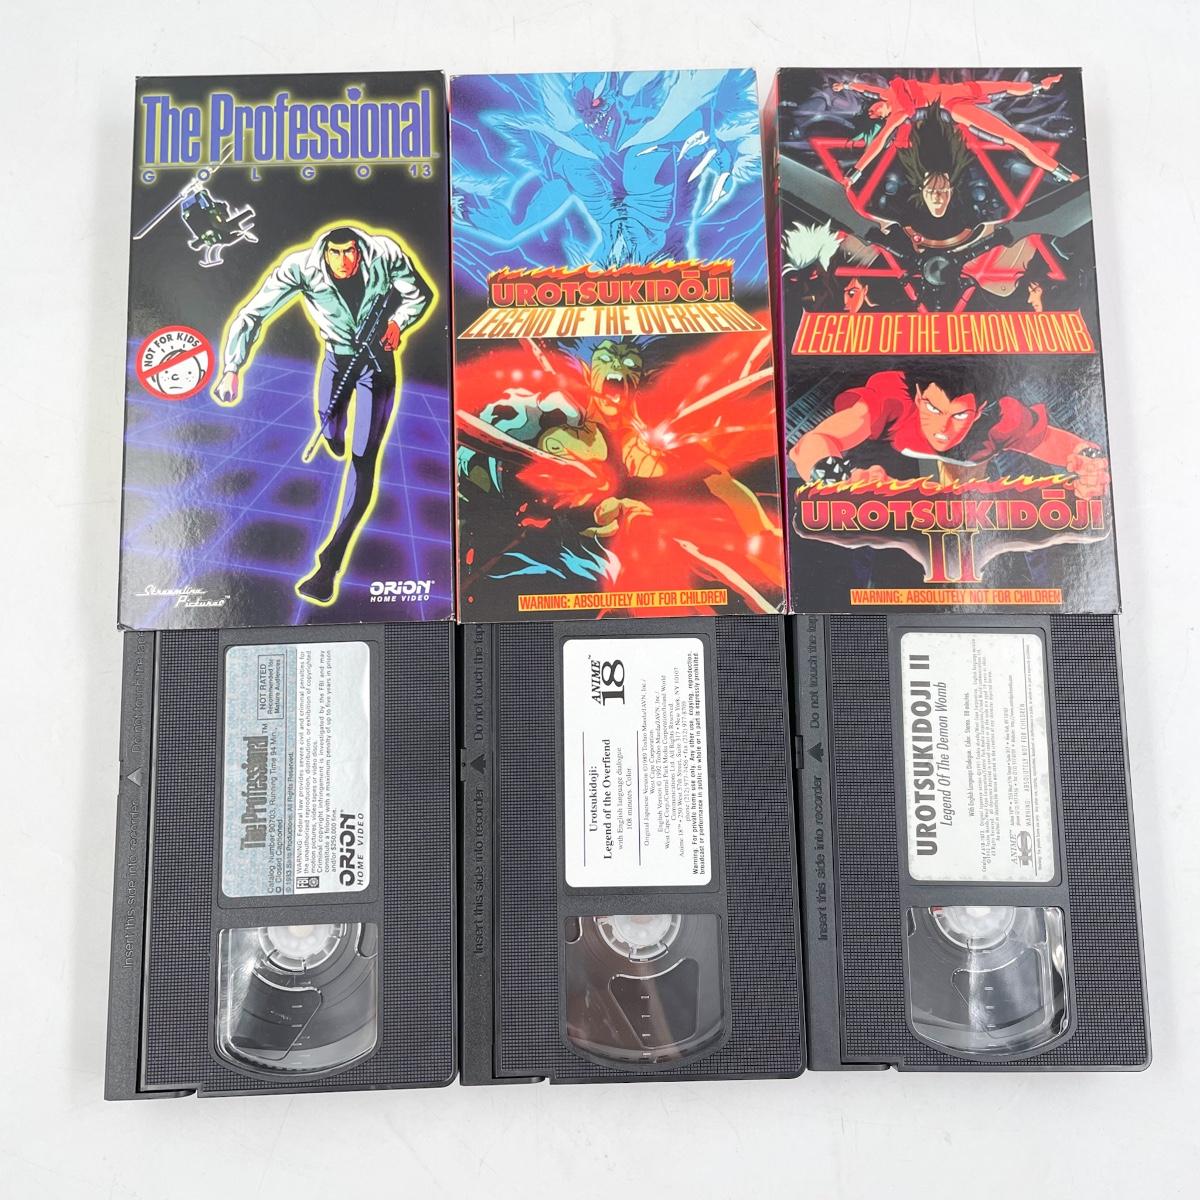 ShawnKaioh on Twitter A pic of the few anime VHS tapes I still have  displayed on my bookshelf VHSanime VHS anime httpstcoLL0fx705jv   Twitter